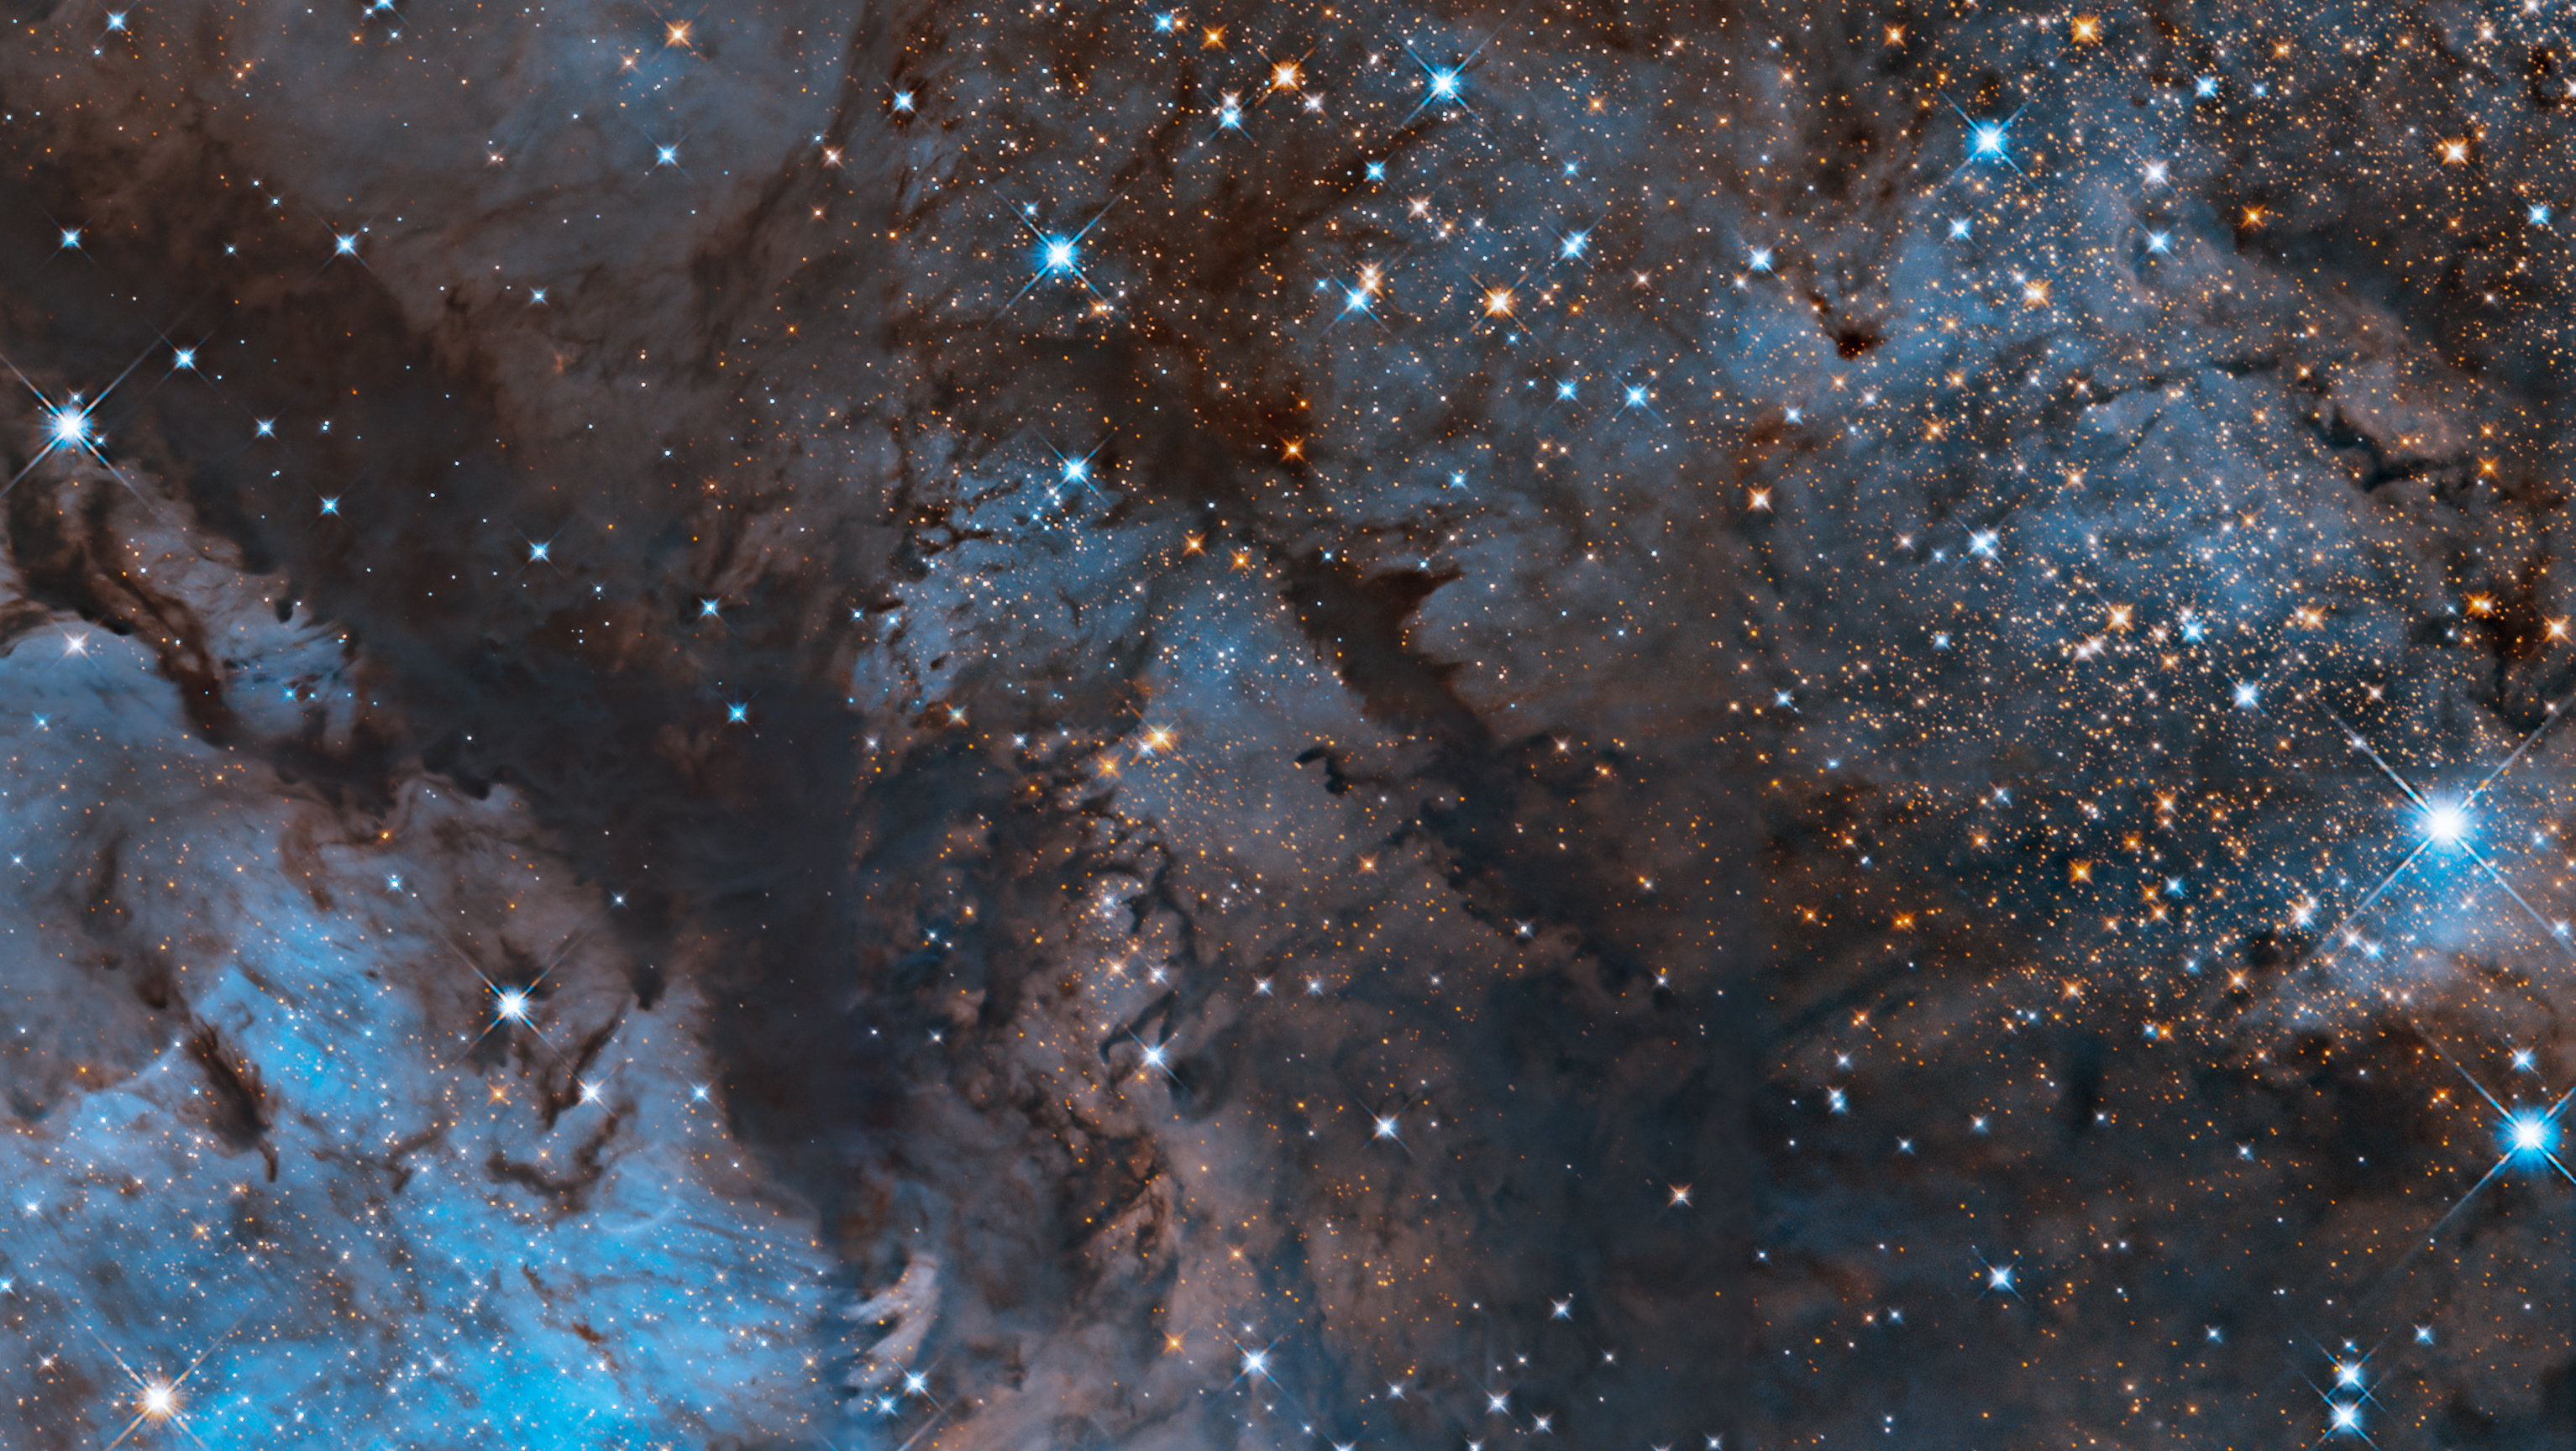 Blue and orange stars glitter across the image, interwoven with dark clouds of brown dust and bright, glowing regions of blue.